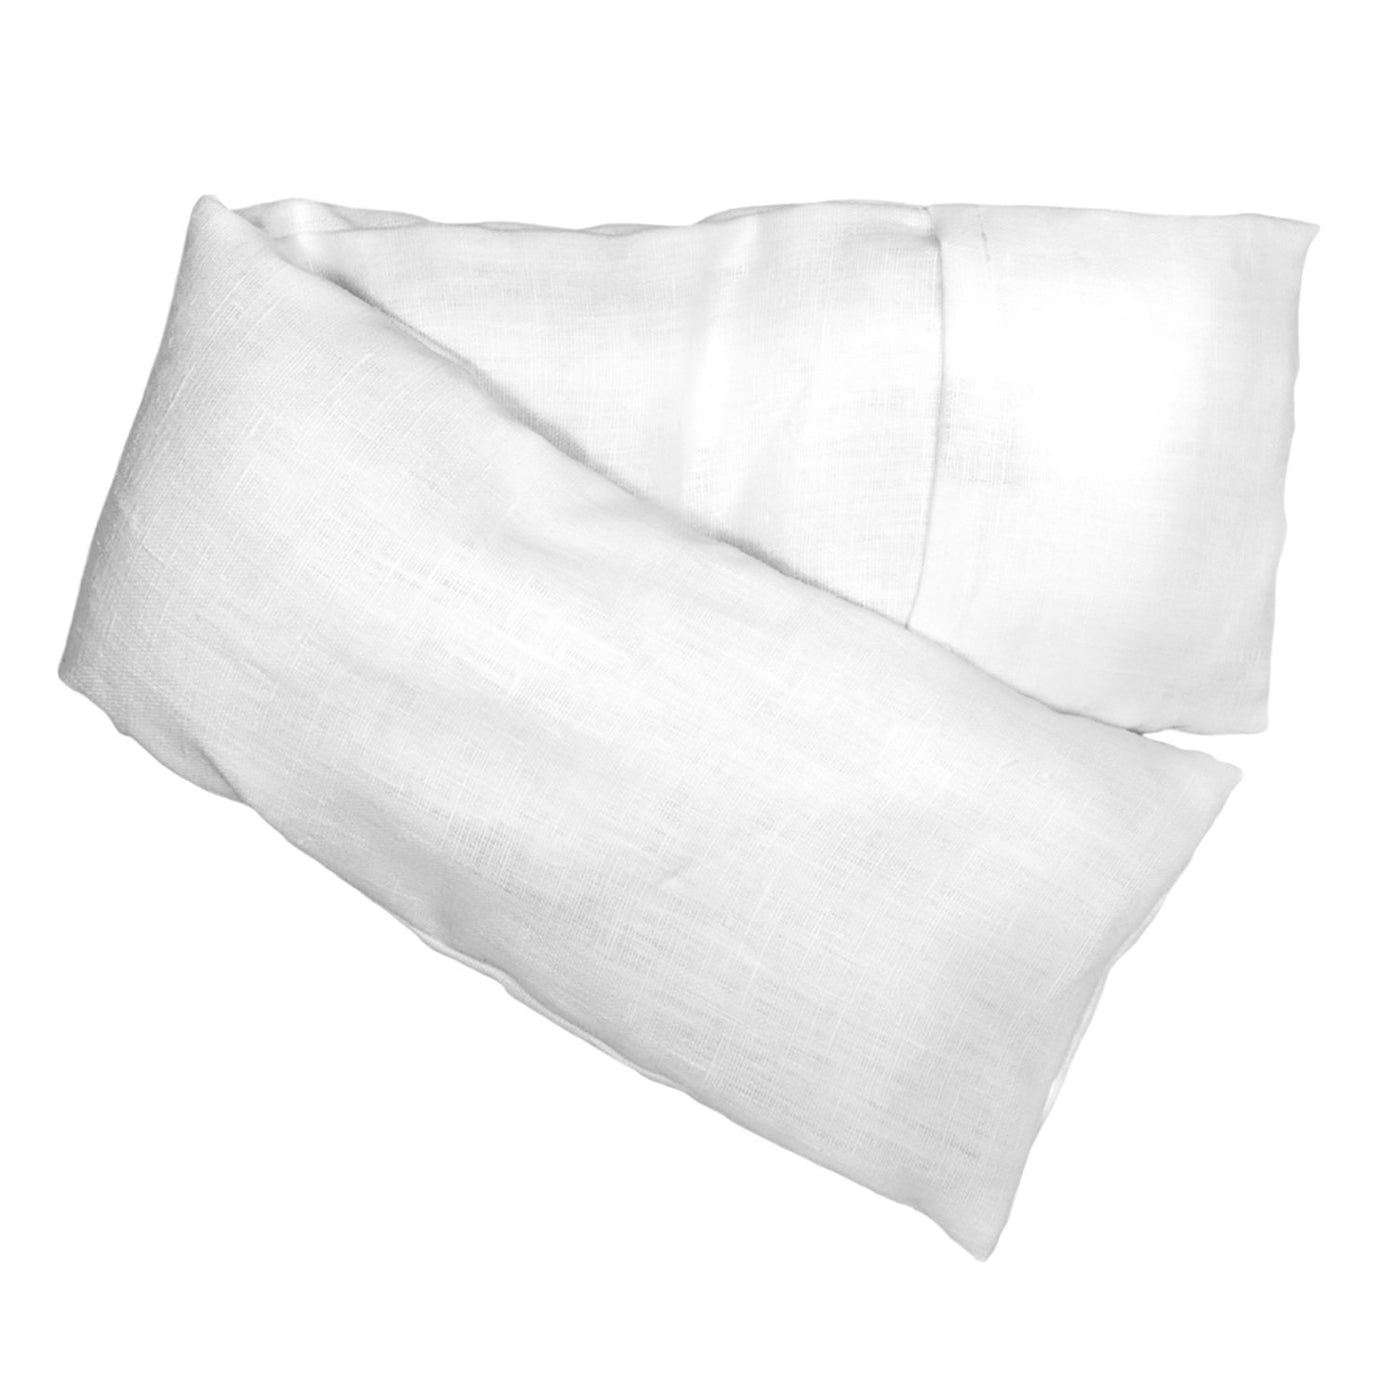 ELIZABETH W HOT/COLD FLAXSEED PACKS WASHED LINEN IVORY